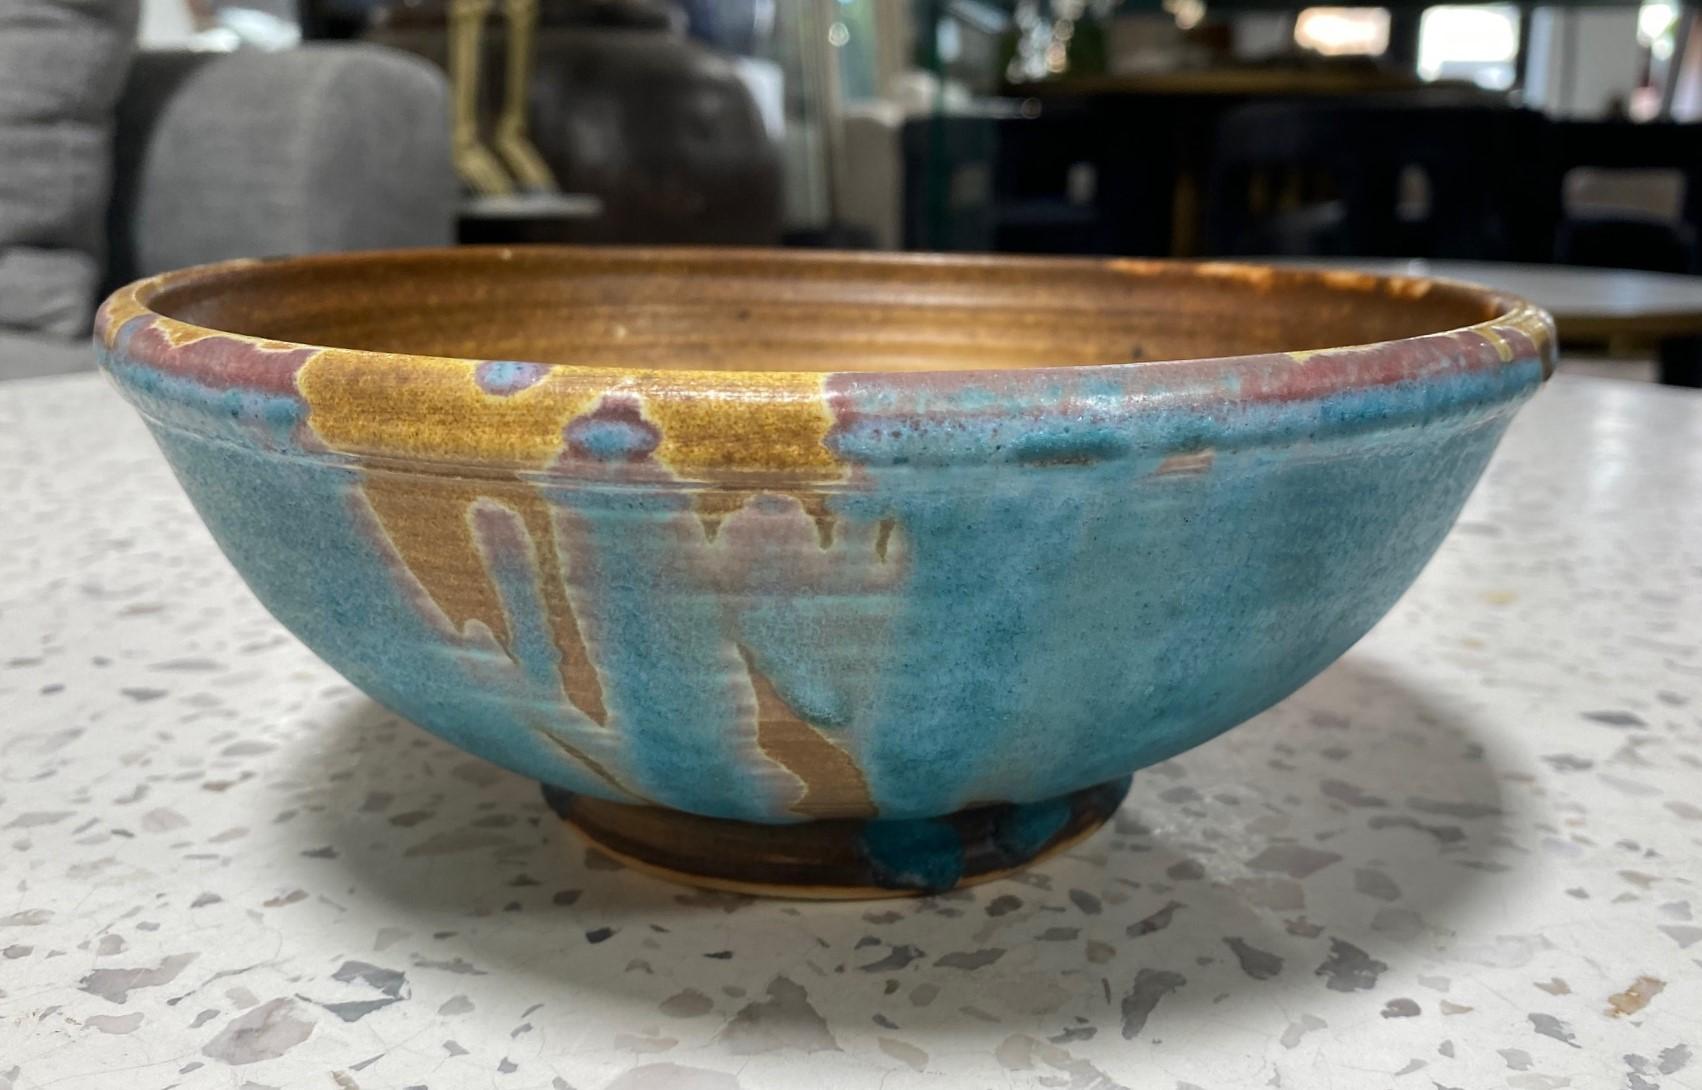 A beautiful and quite engaging relatively large sumptuously glazed bowl by famed Japanese Hawaiian American pottery master Toshiko Takaezu. The high-fired porcelain bowl features a vast array of shifting, vibrant, and colorful glazes (with earth